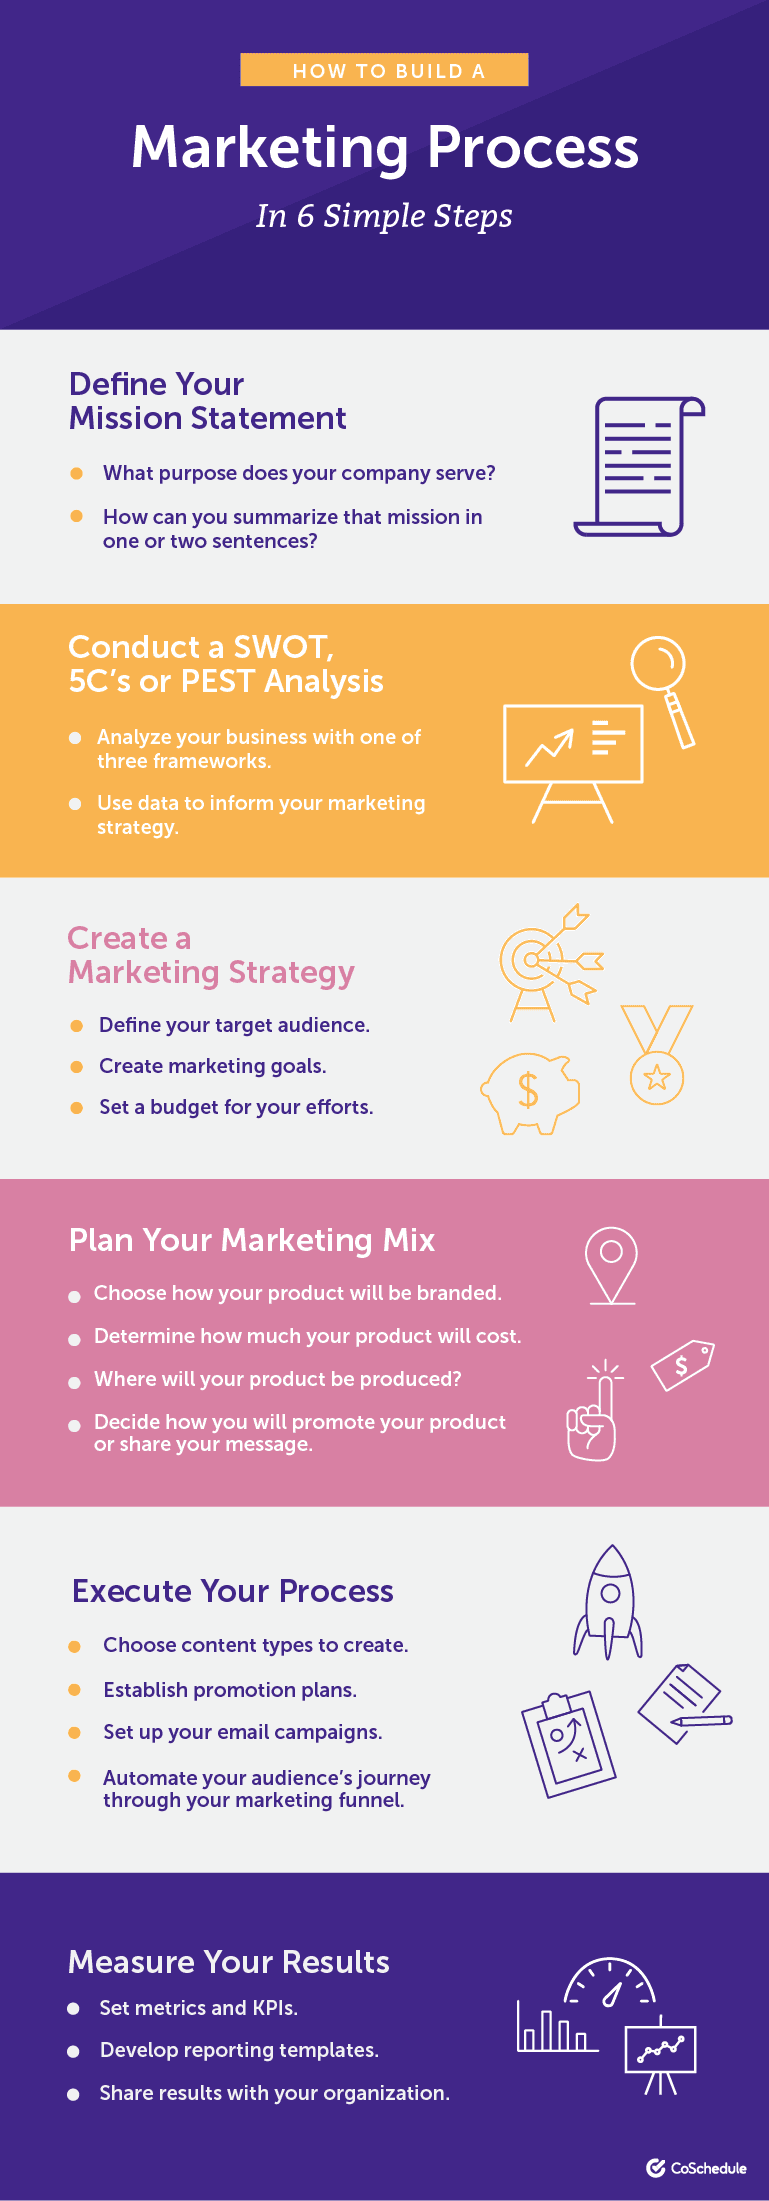 Infographic on how to build a marketing process in 6 steps